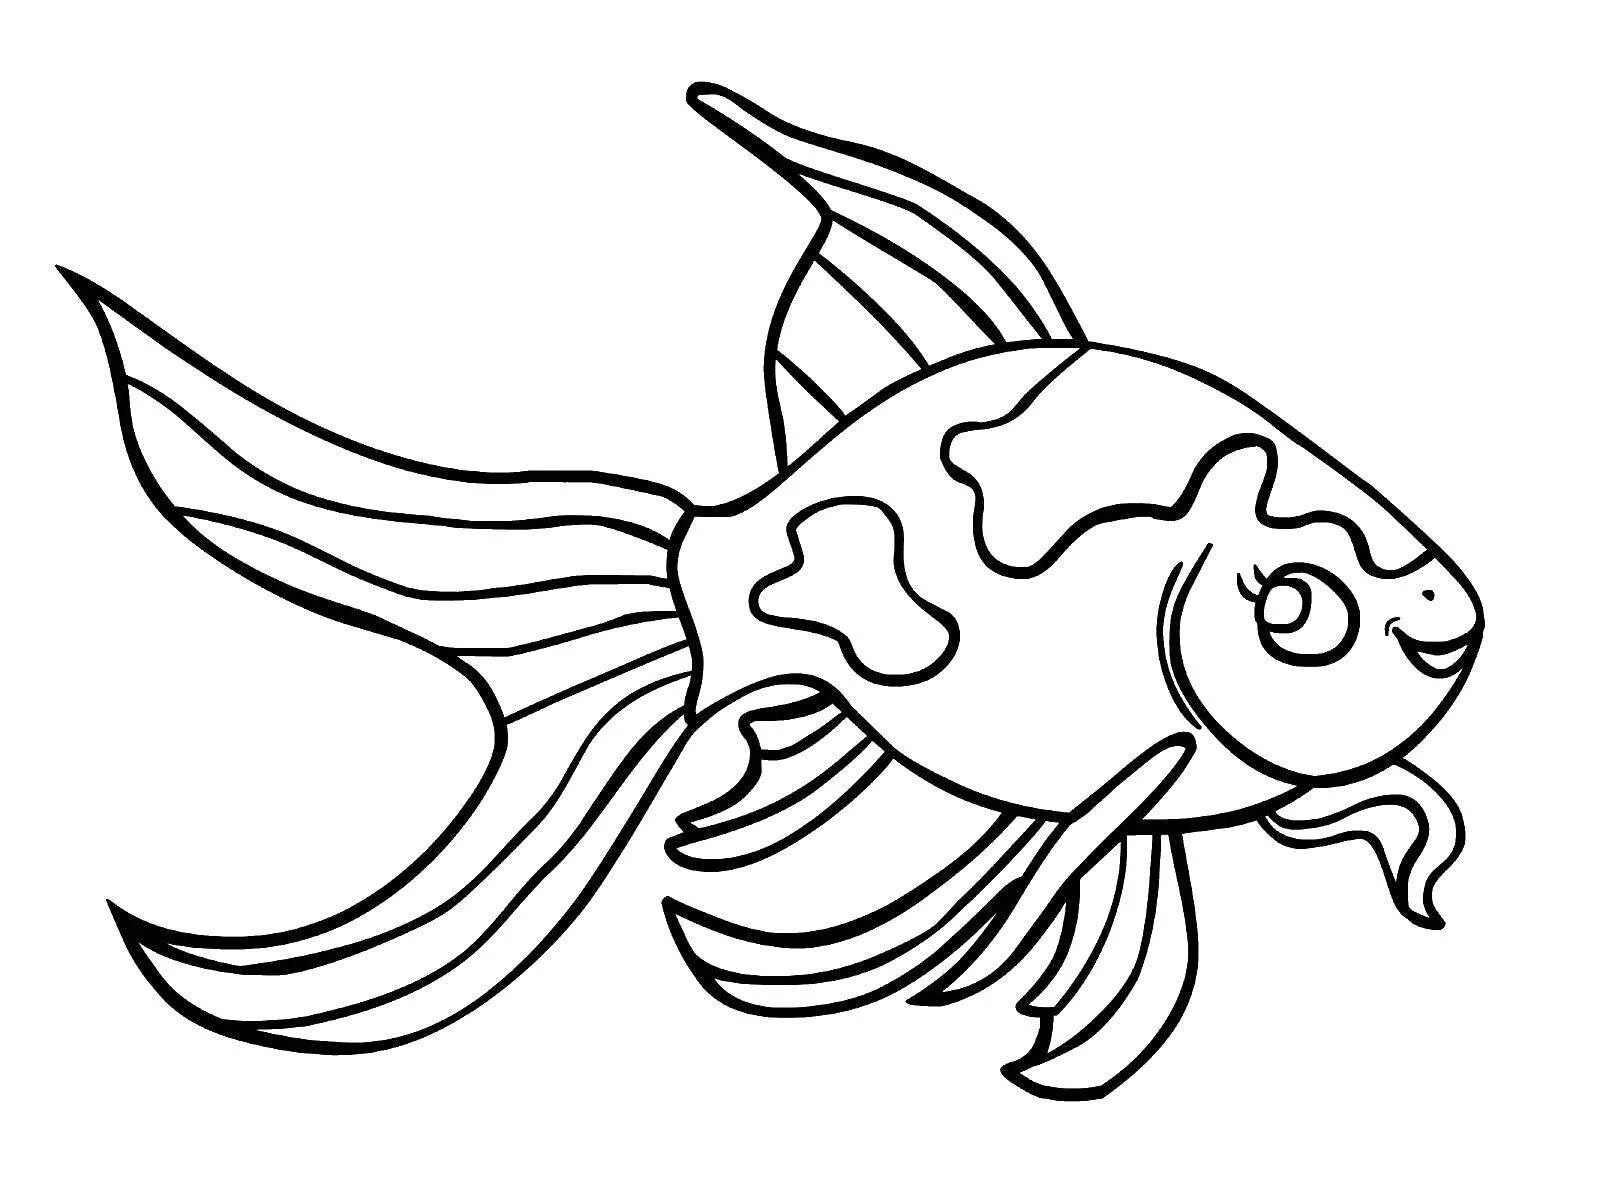 Fish pattern for kids #9